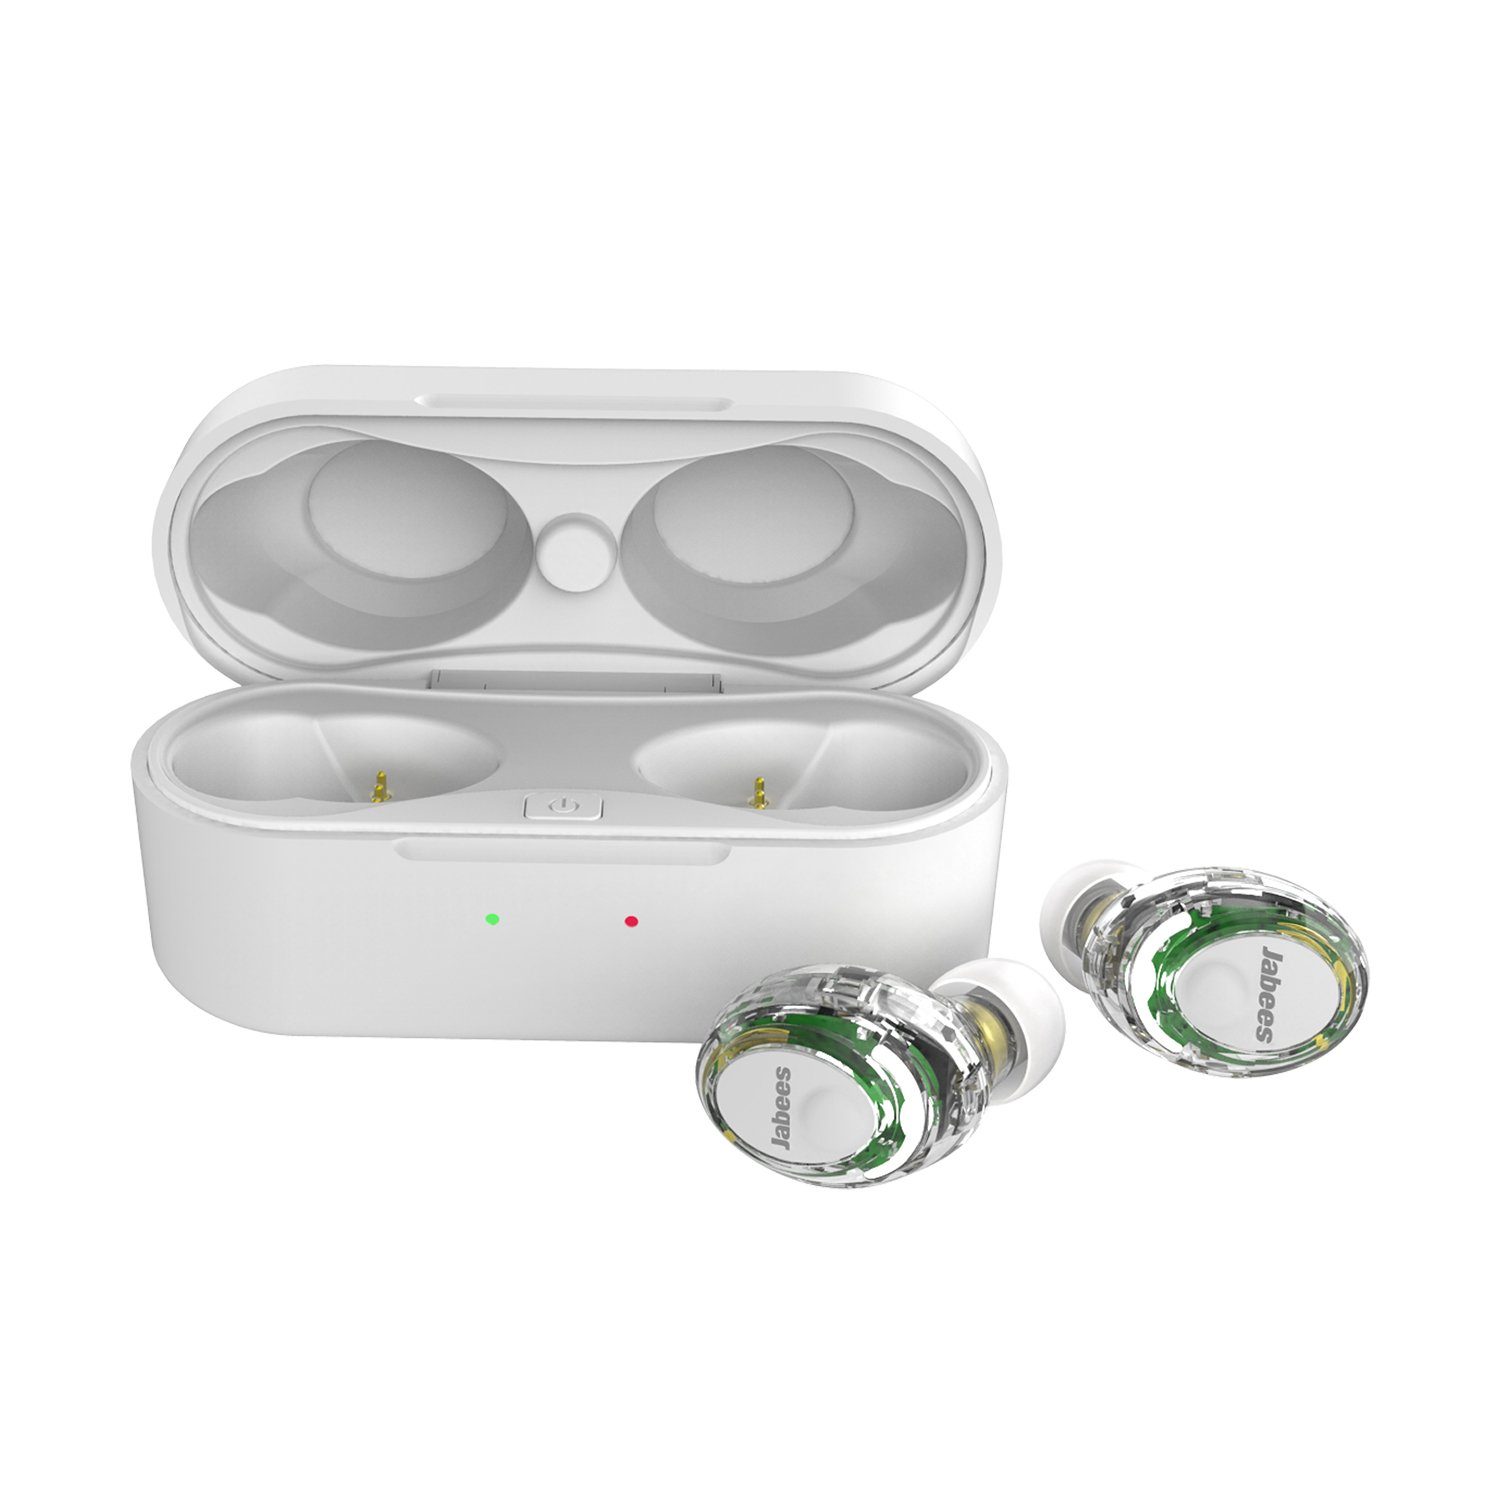 Firefly Pro - True Wireless Earbuds Featuring Fast Charging & Qi-Enabled Wireless Charging Case - True Wireless Earbuds - Jabees Store - jabeesstore